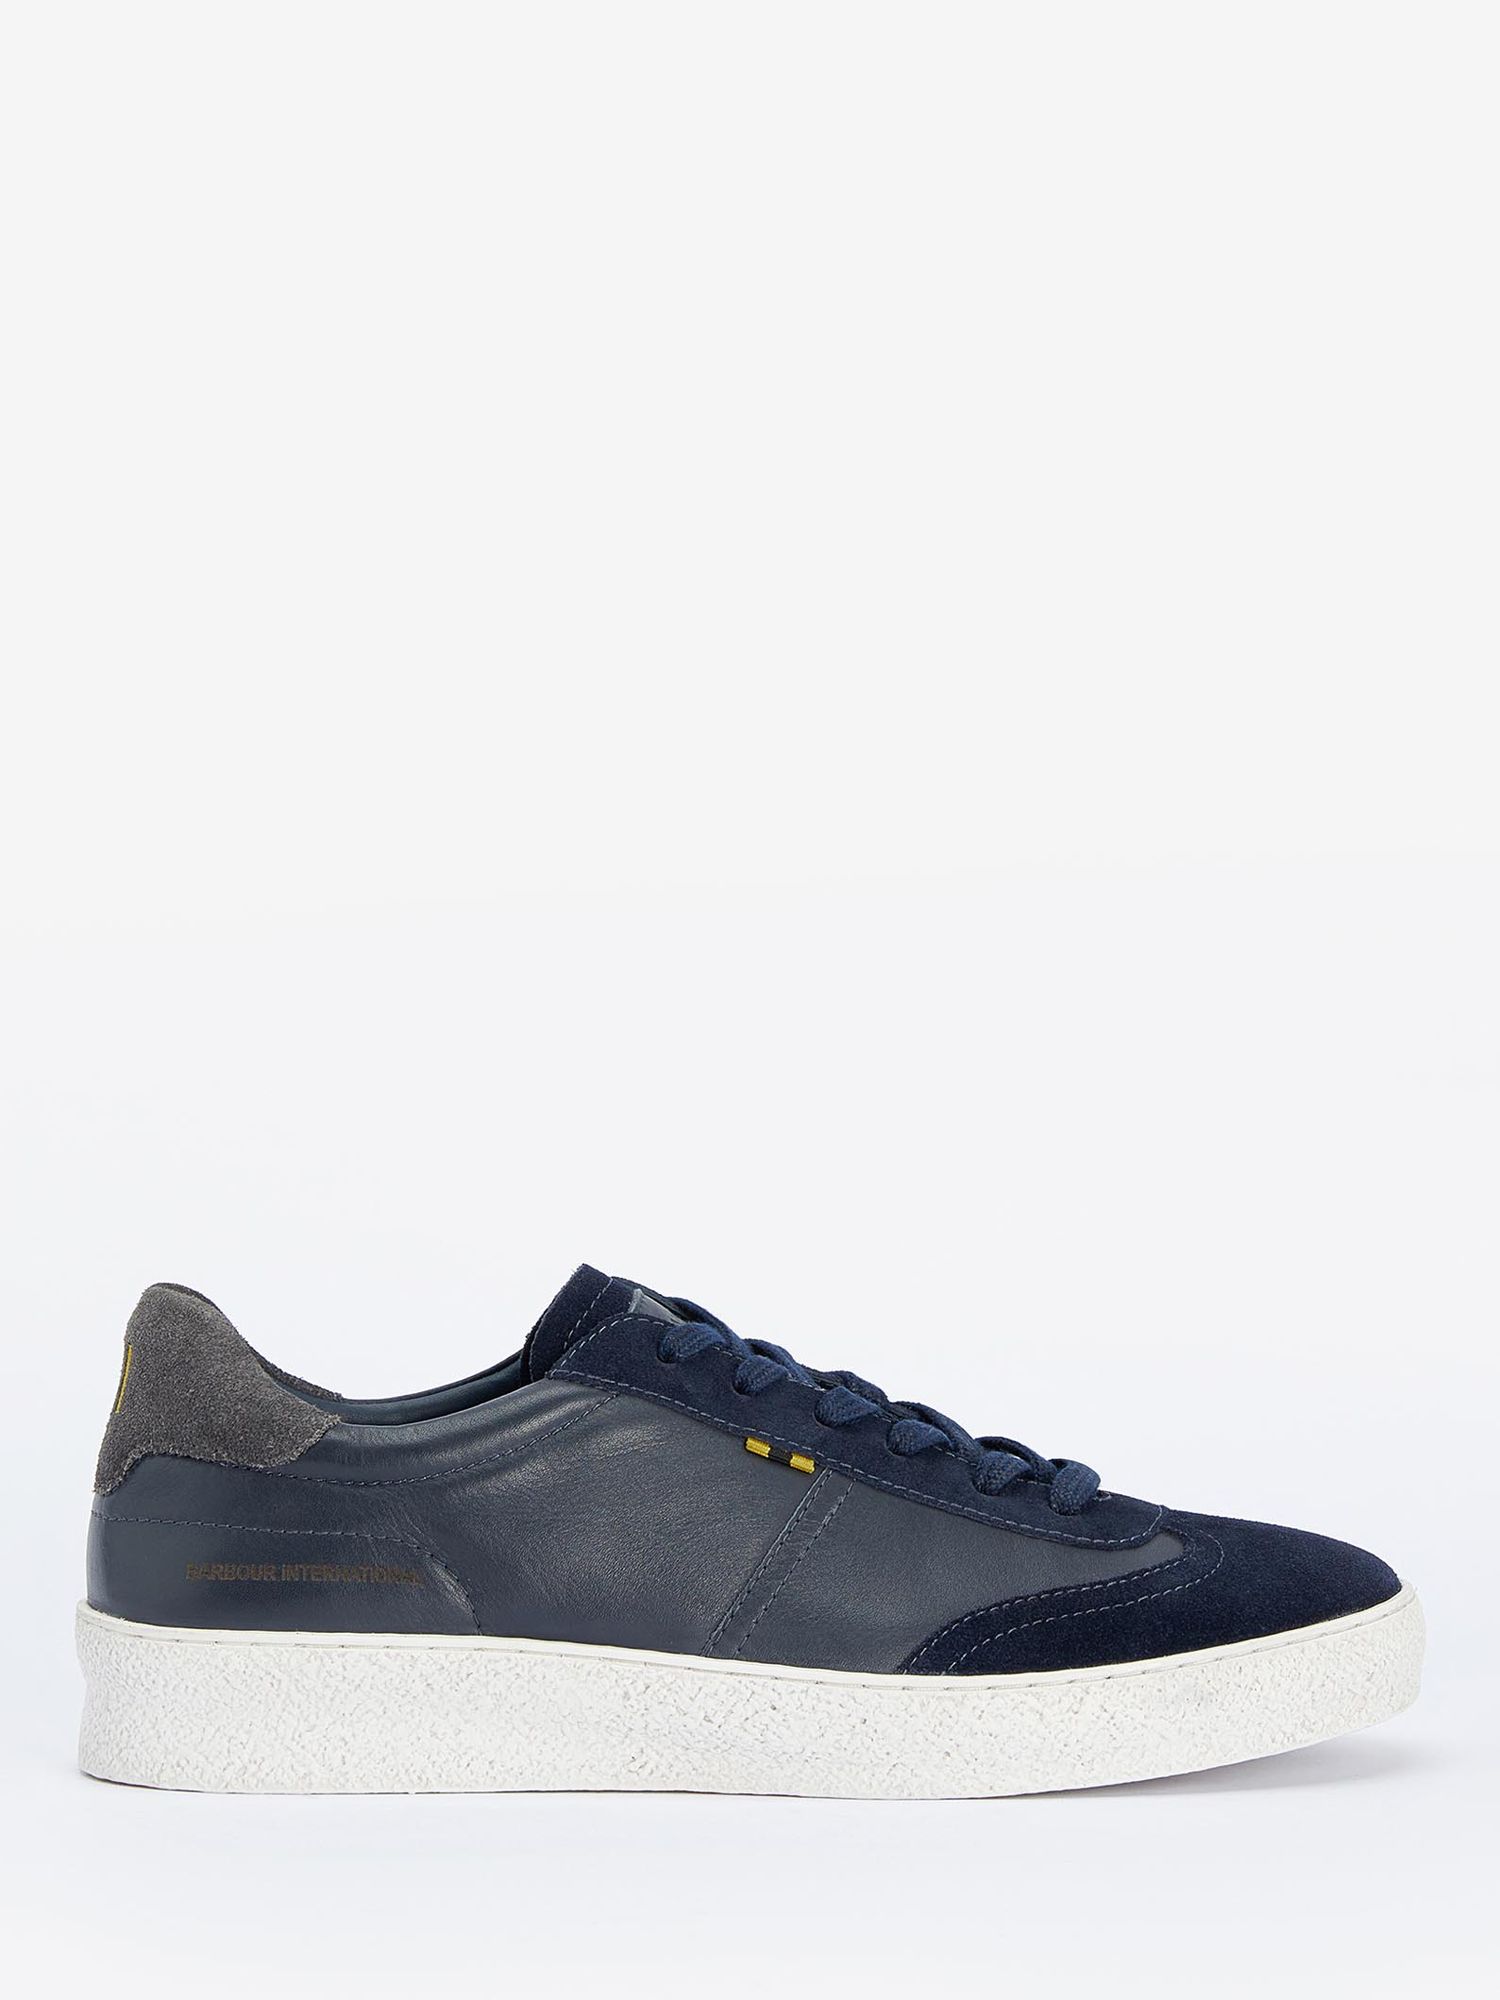 Barbour International Felix Leather Lace Up Trainers, Navy